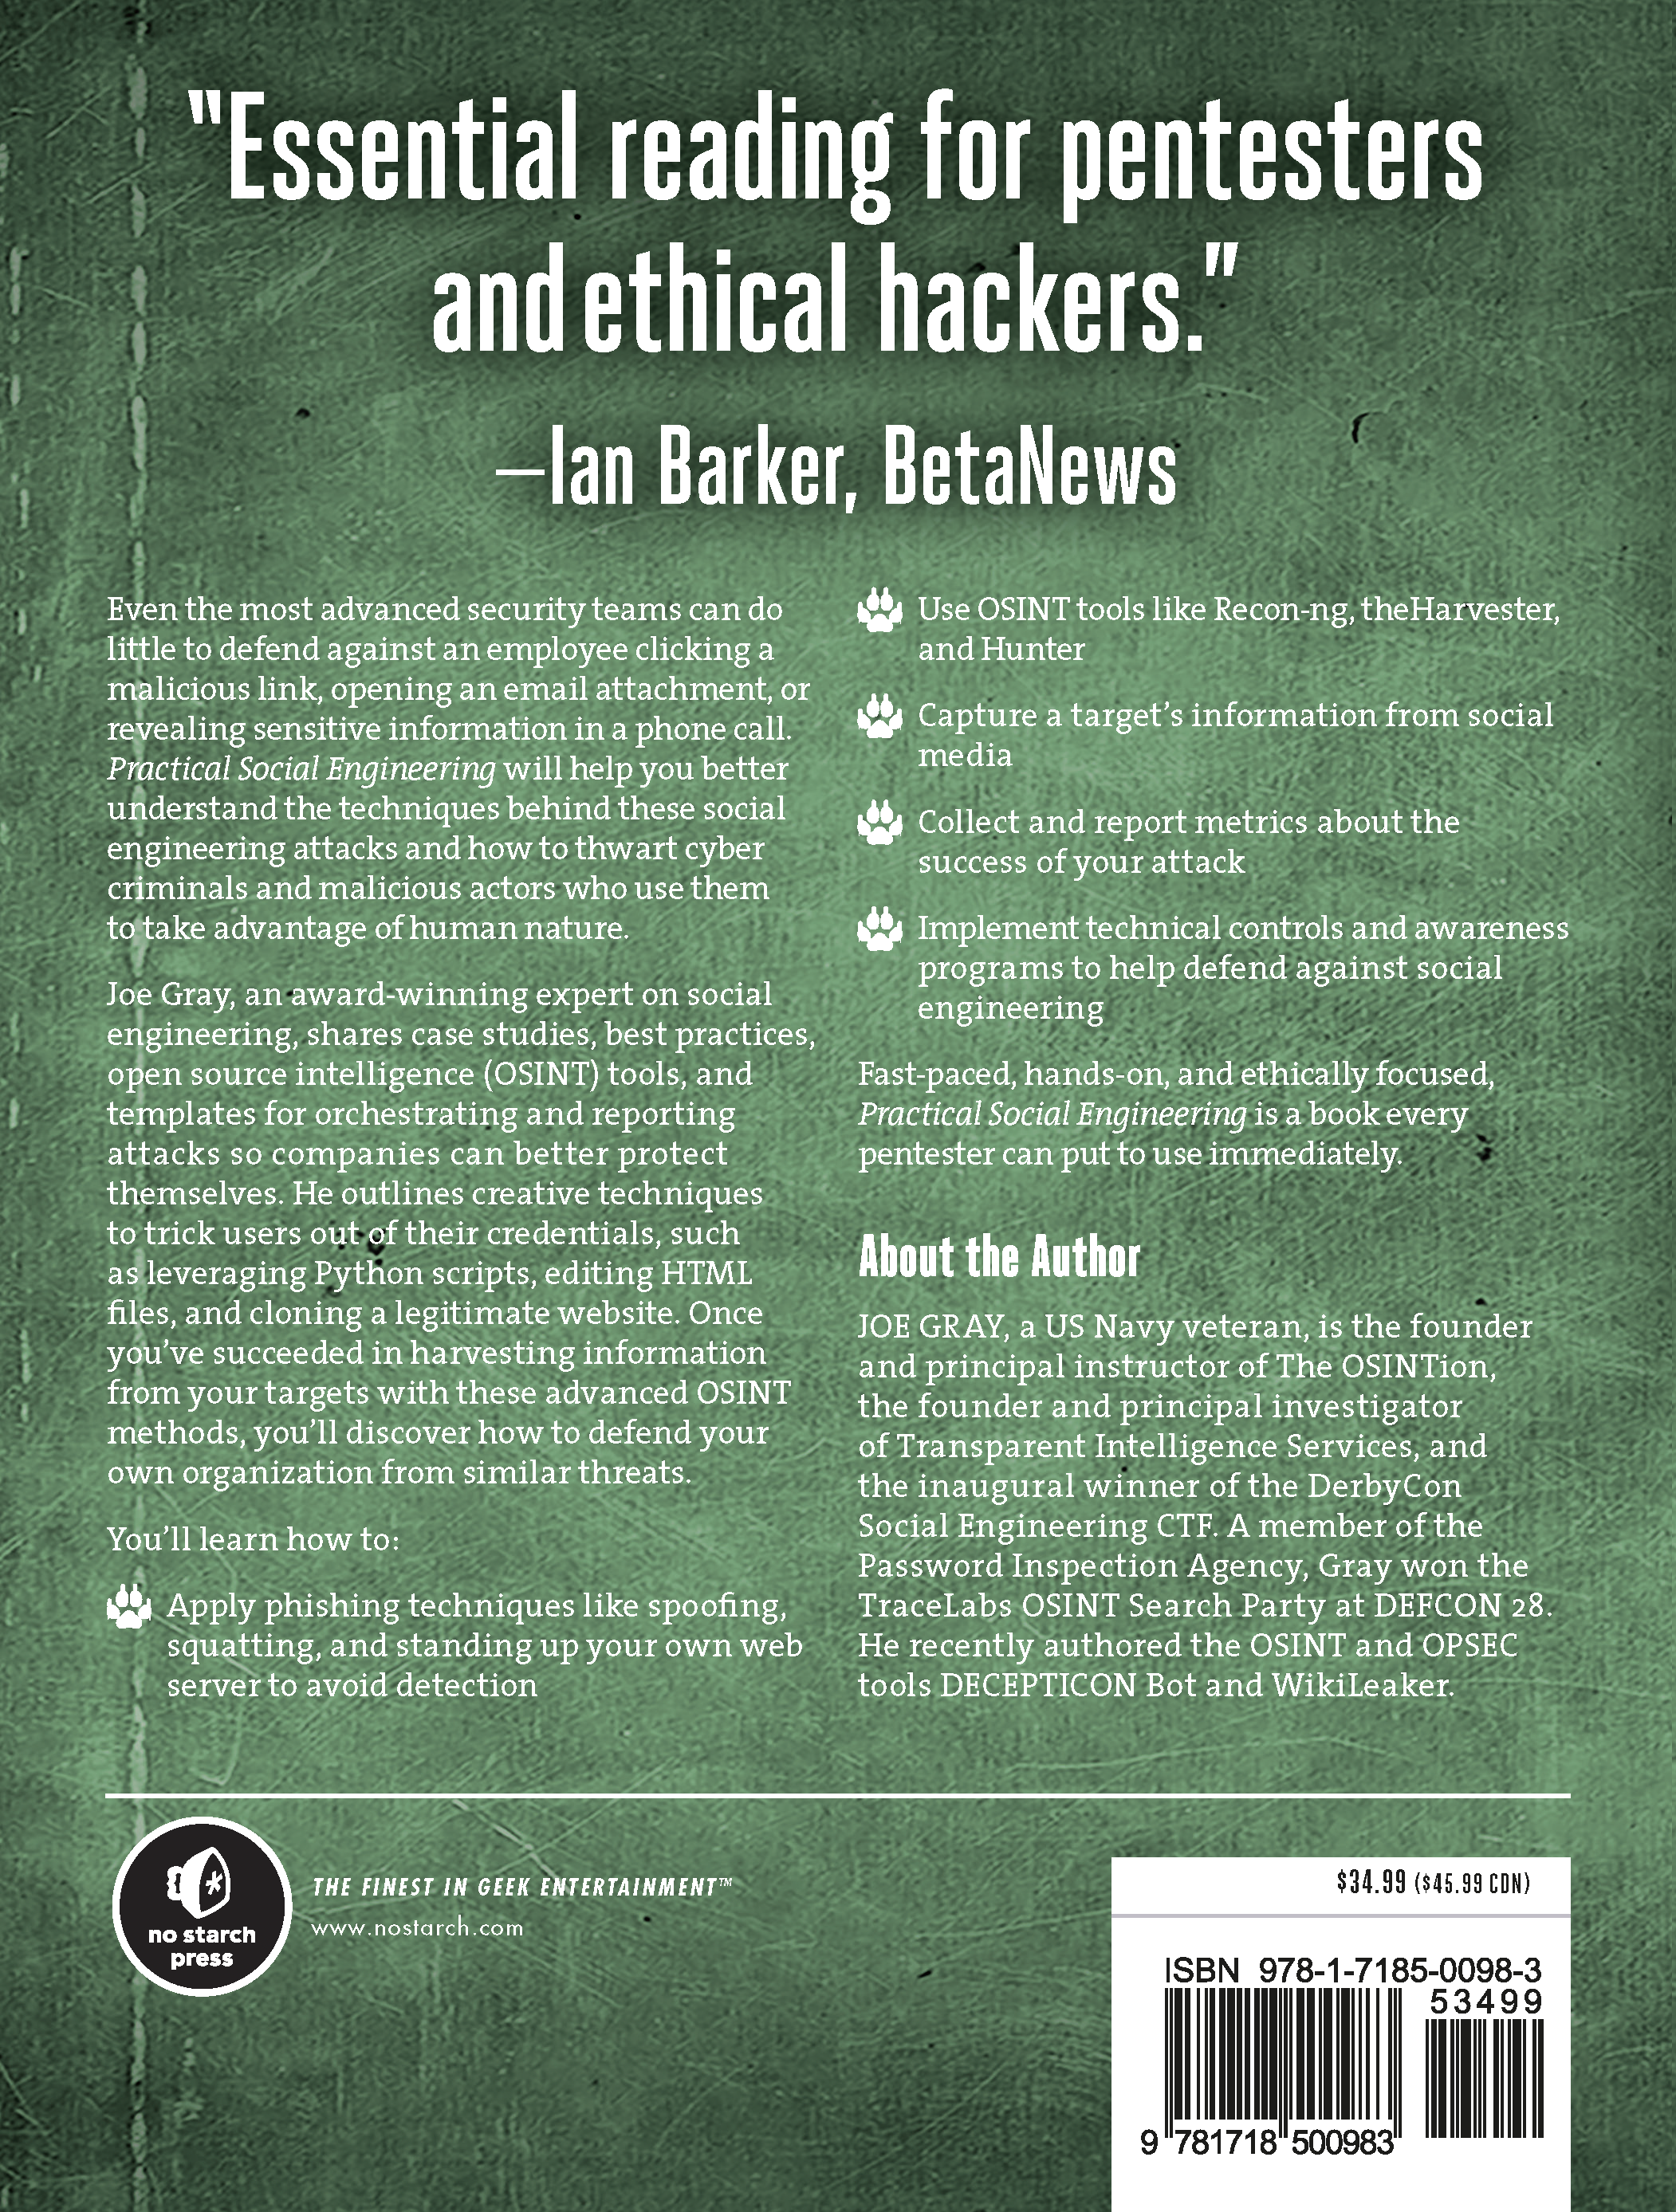 Practical Social Engineering back cover